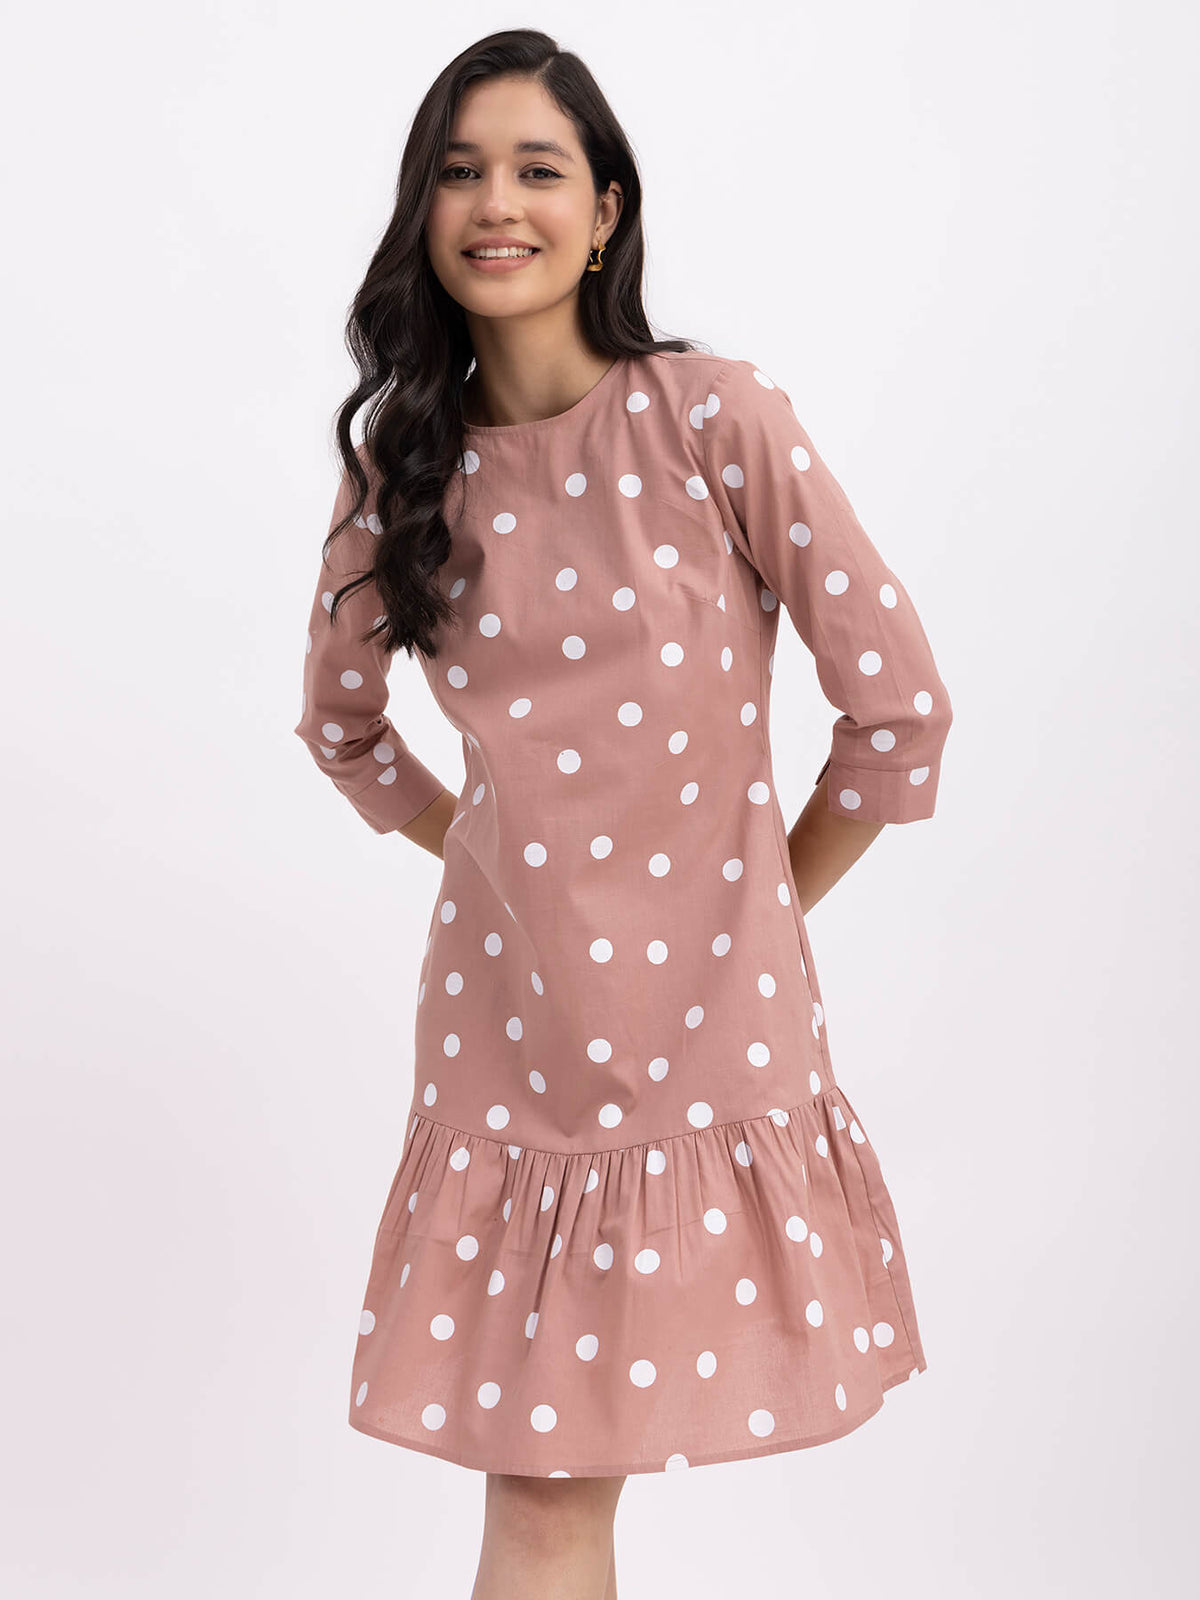 Cotton Polka Dot Tier Dress - Dusty Pink And White